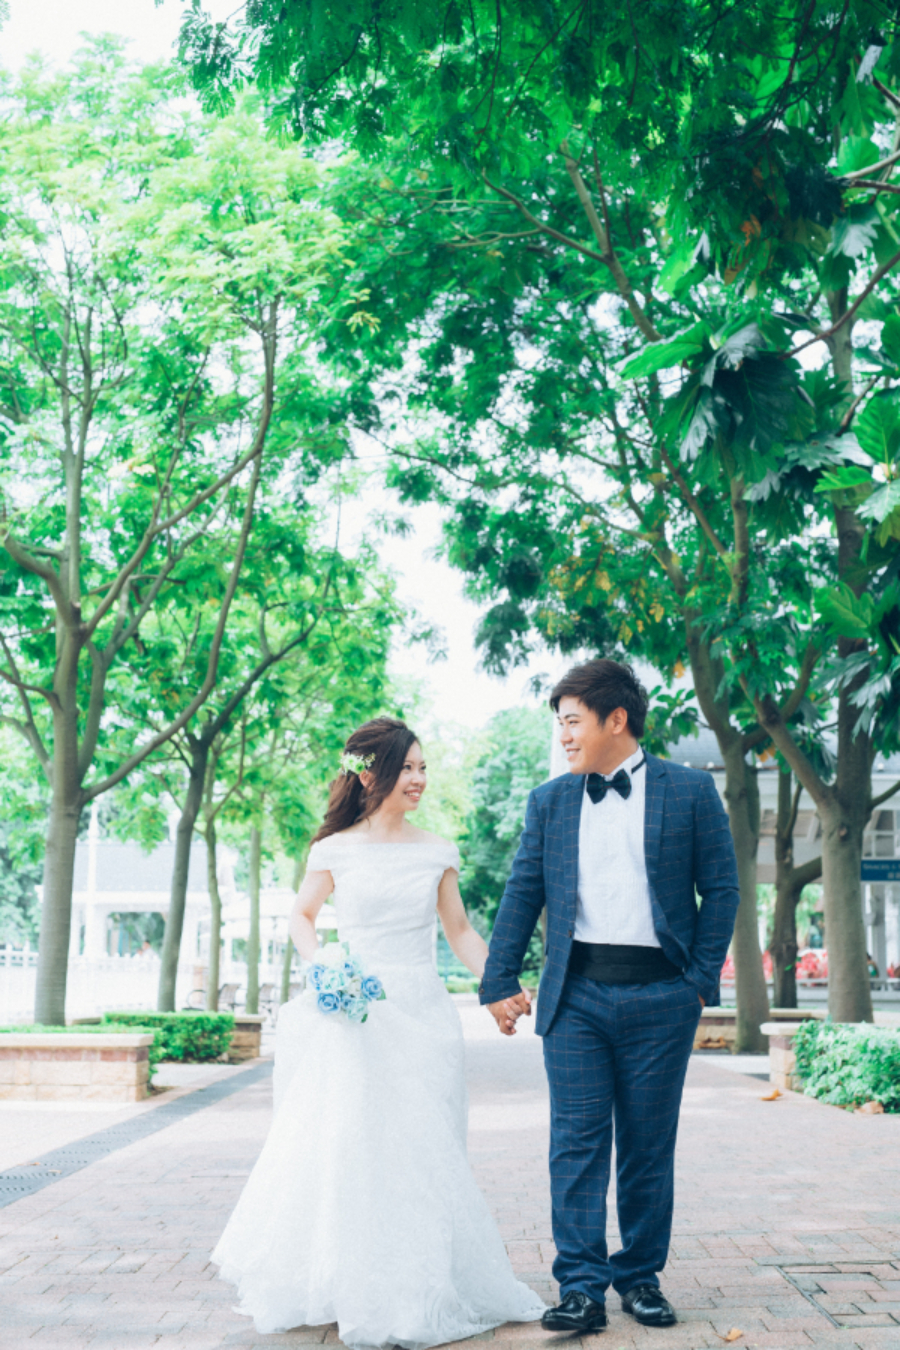 Hong Kong Outdoor Pre-Wedding Photoshoot At Disney Lake, Stanley, Central Pier by Felix on OneThreeOneFour 4